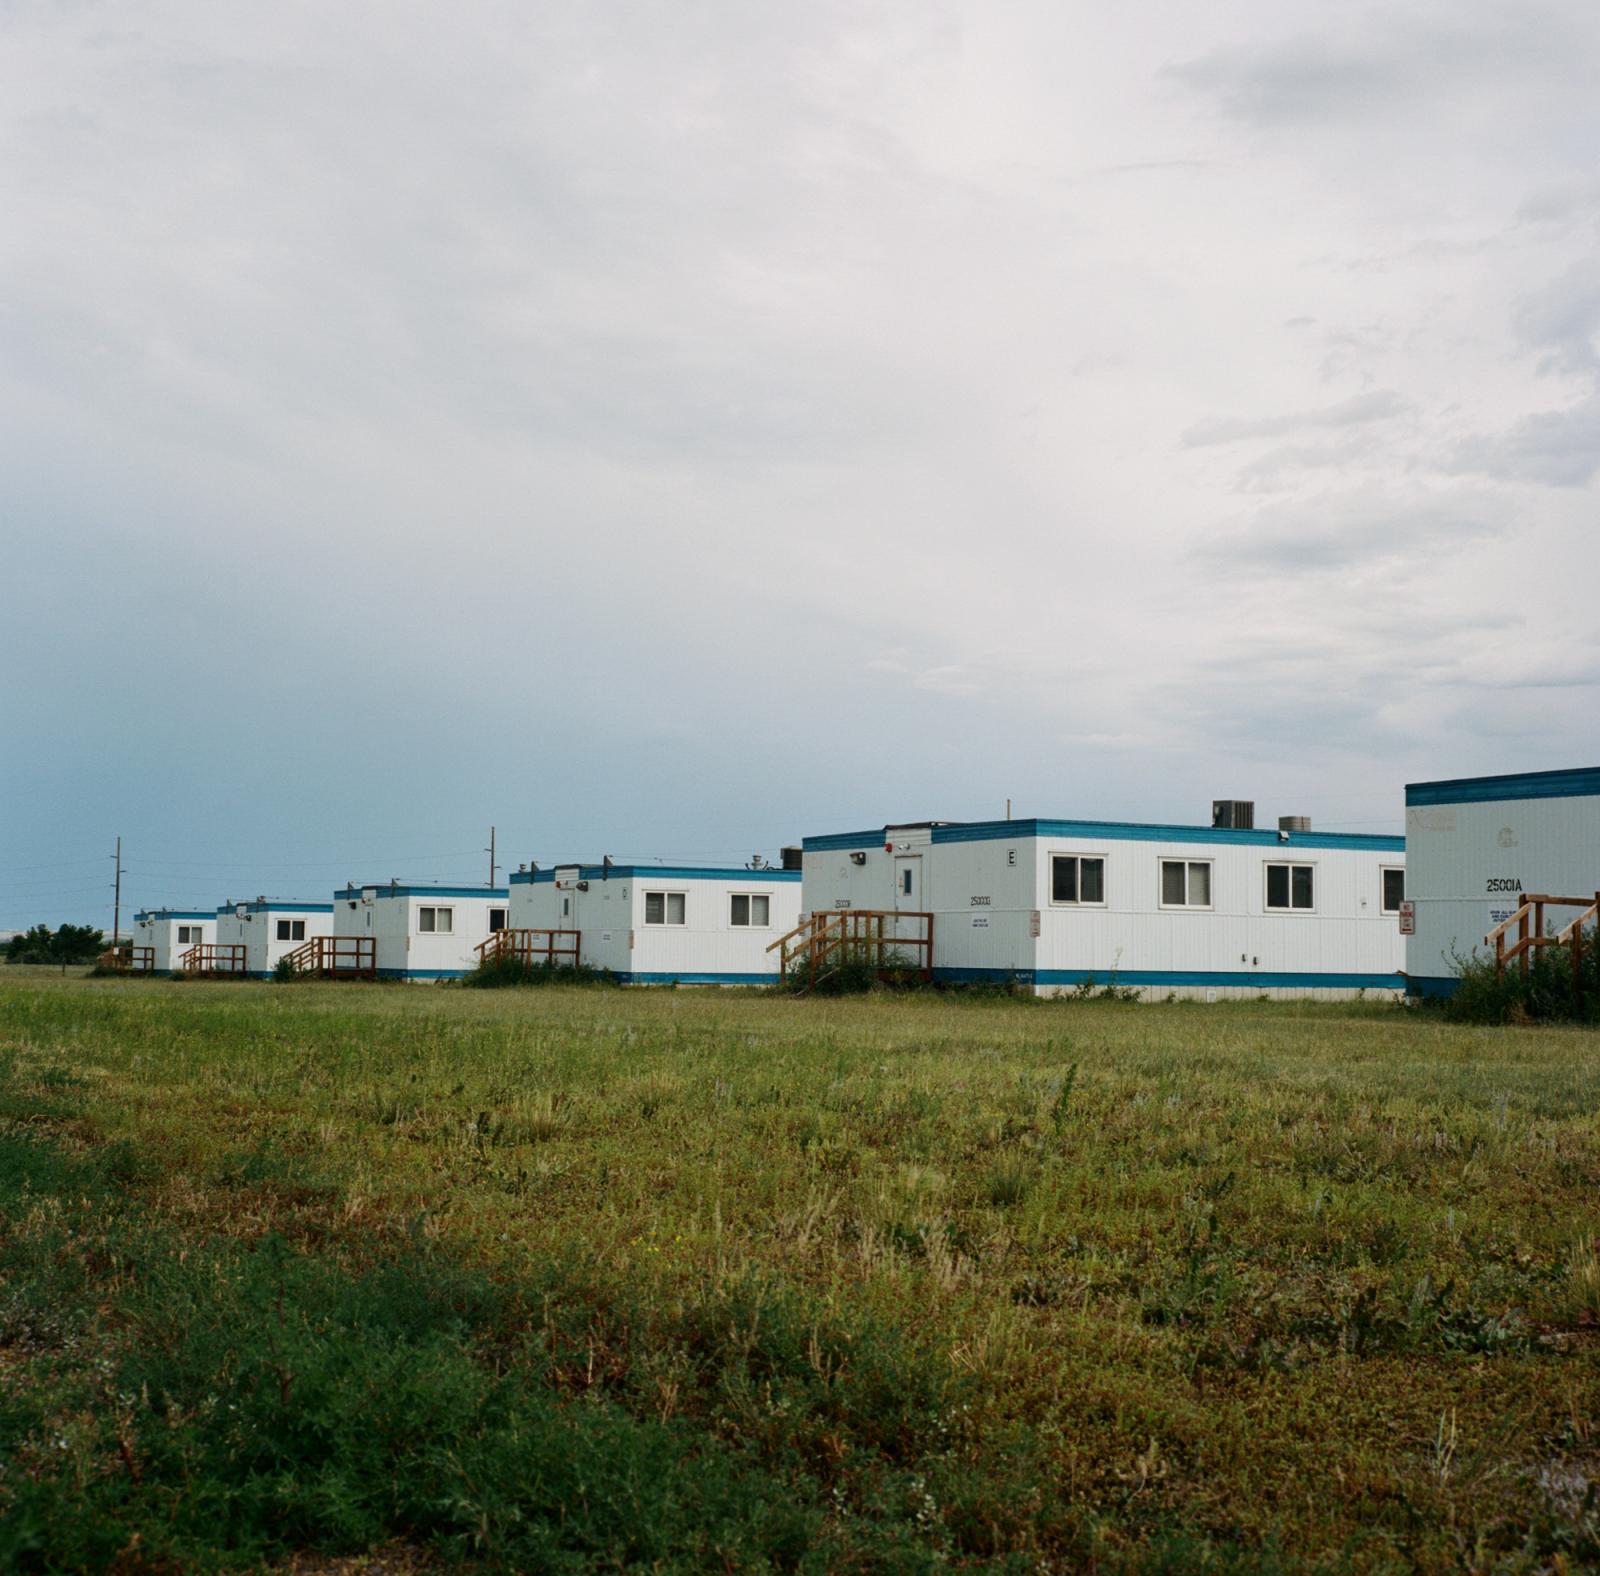 The Bakken oil shale's impact on Native American women - An abandoned “man camp” which provides...